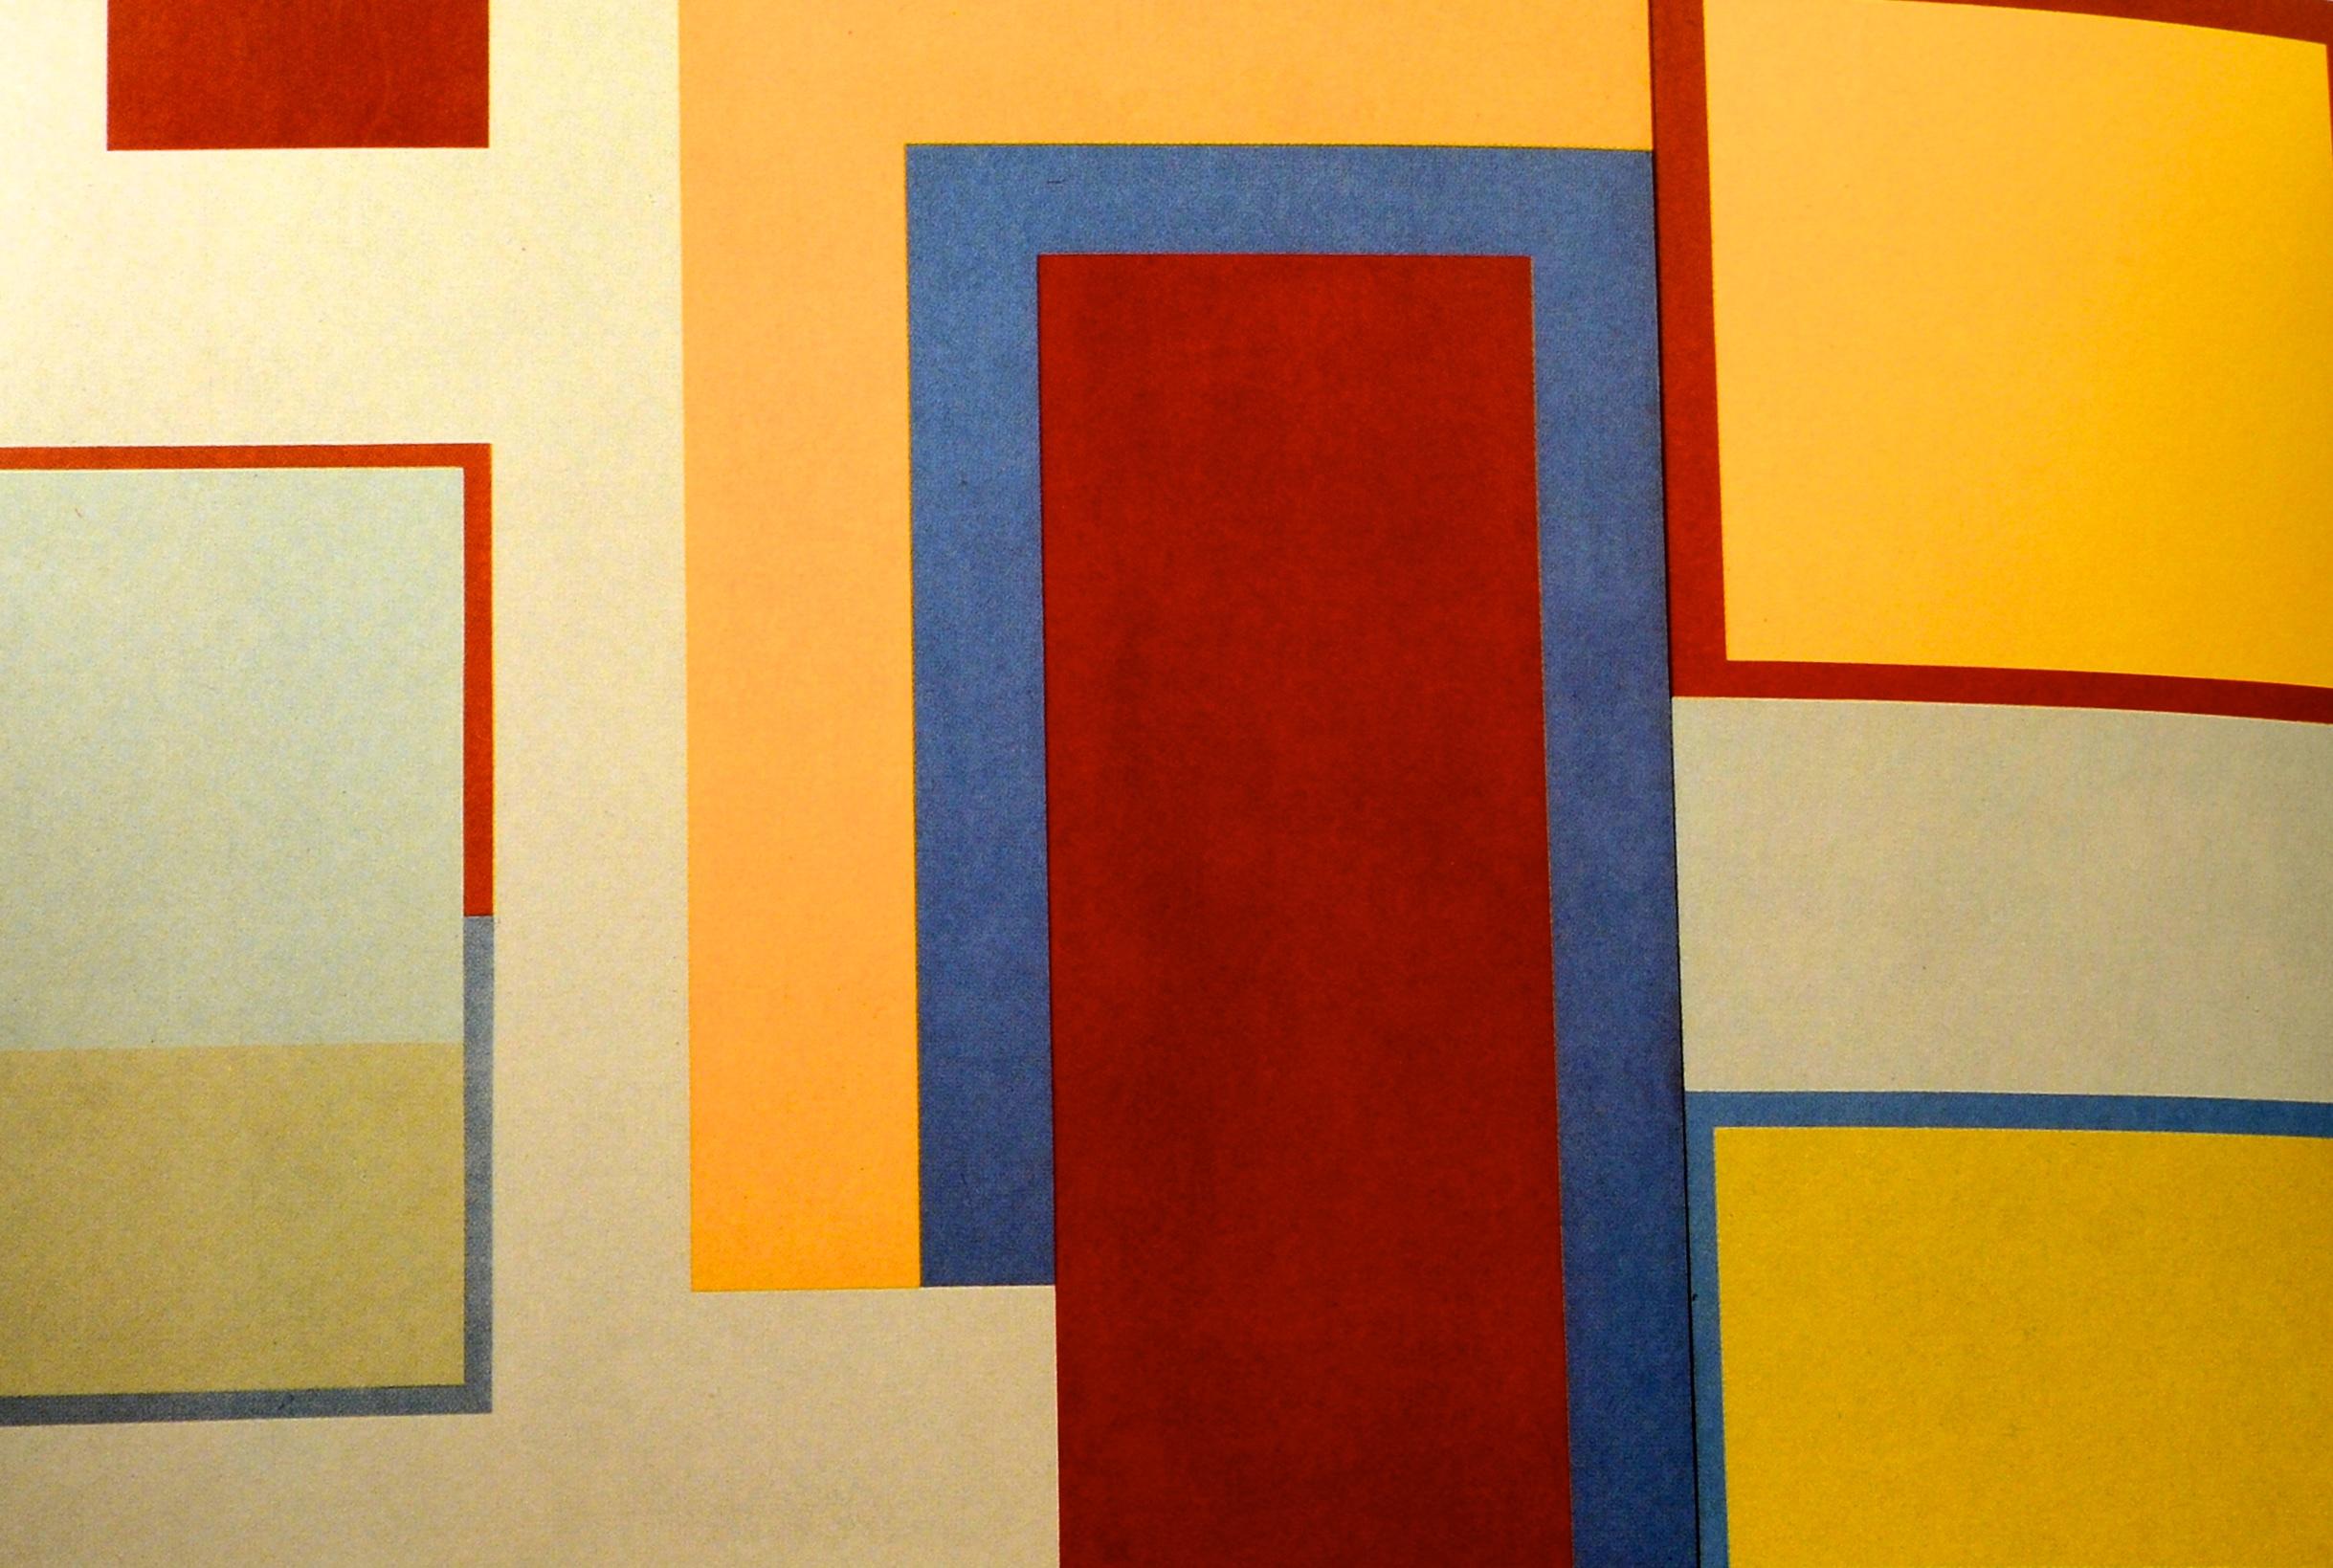 Paper Contrasts of Form, Geometric Abstract Art, 1910-1980, 1st Ed For Sale